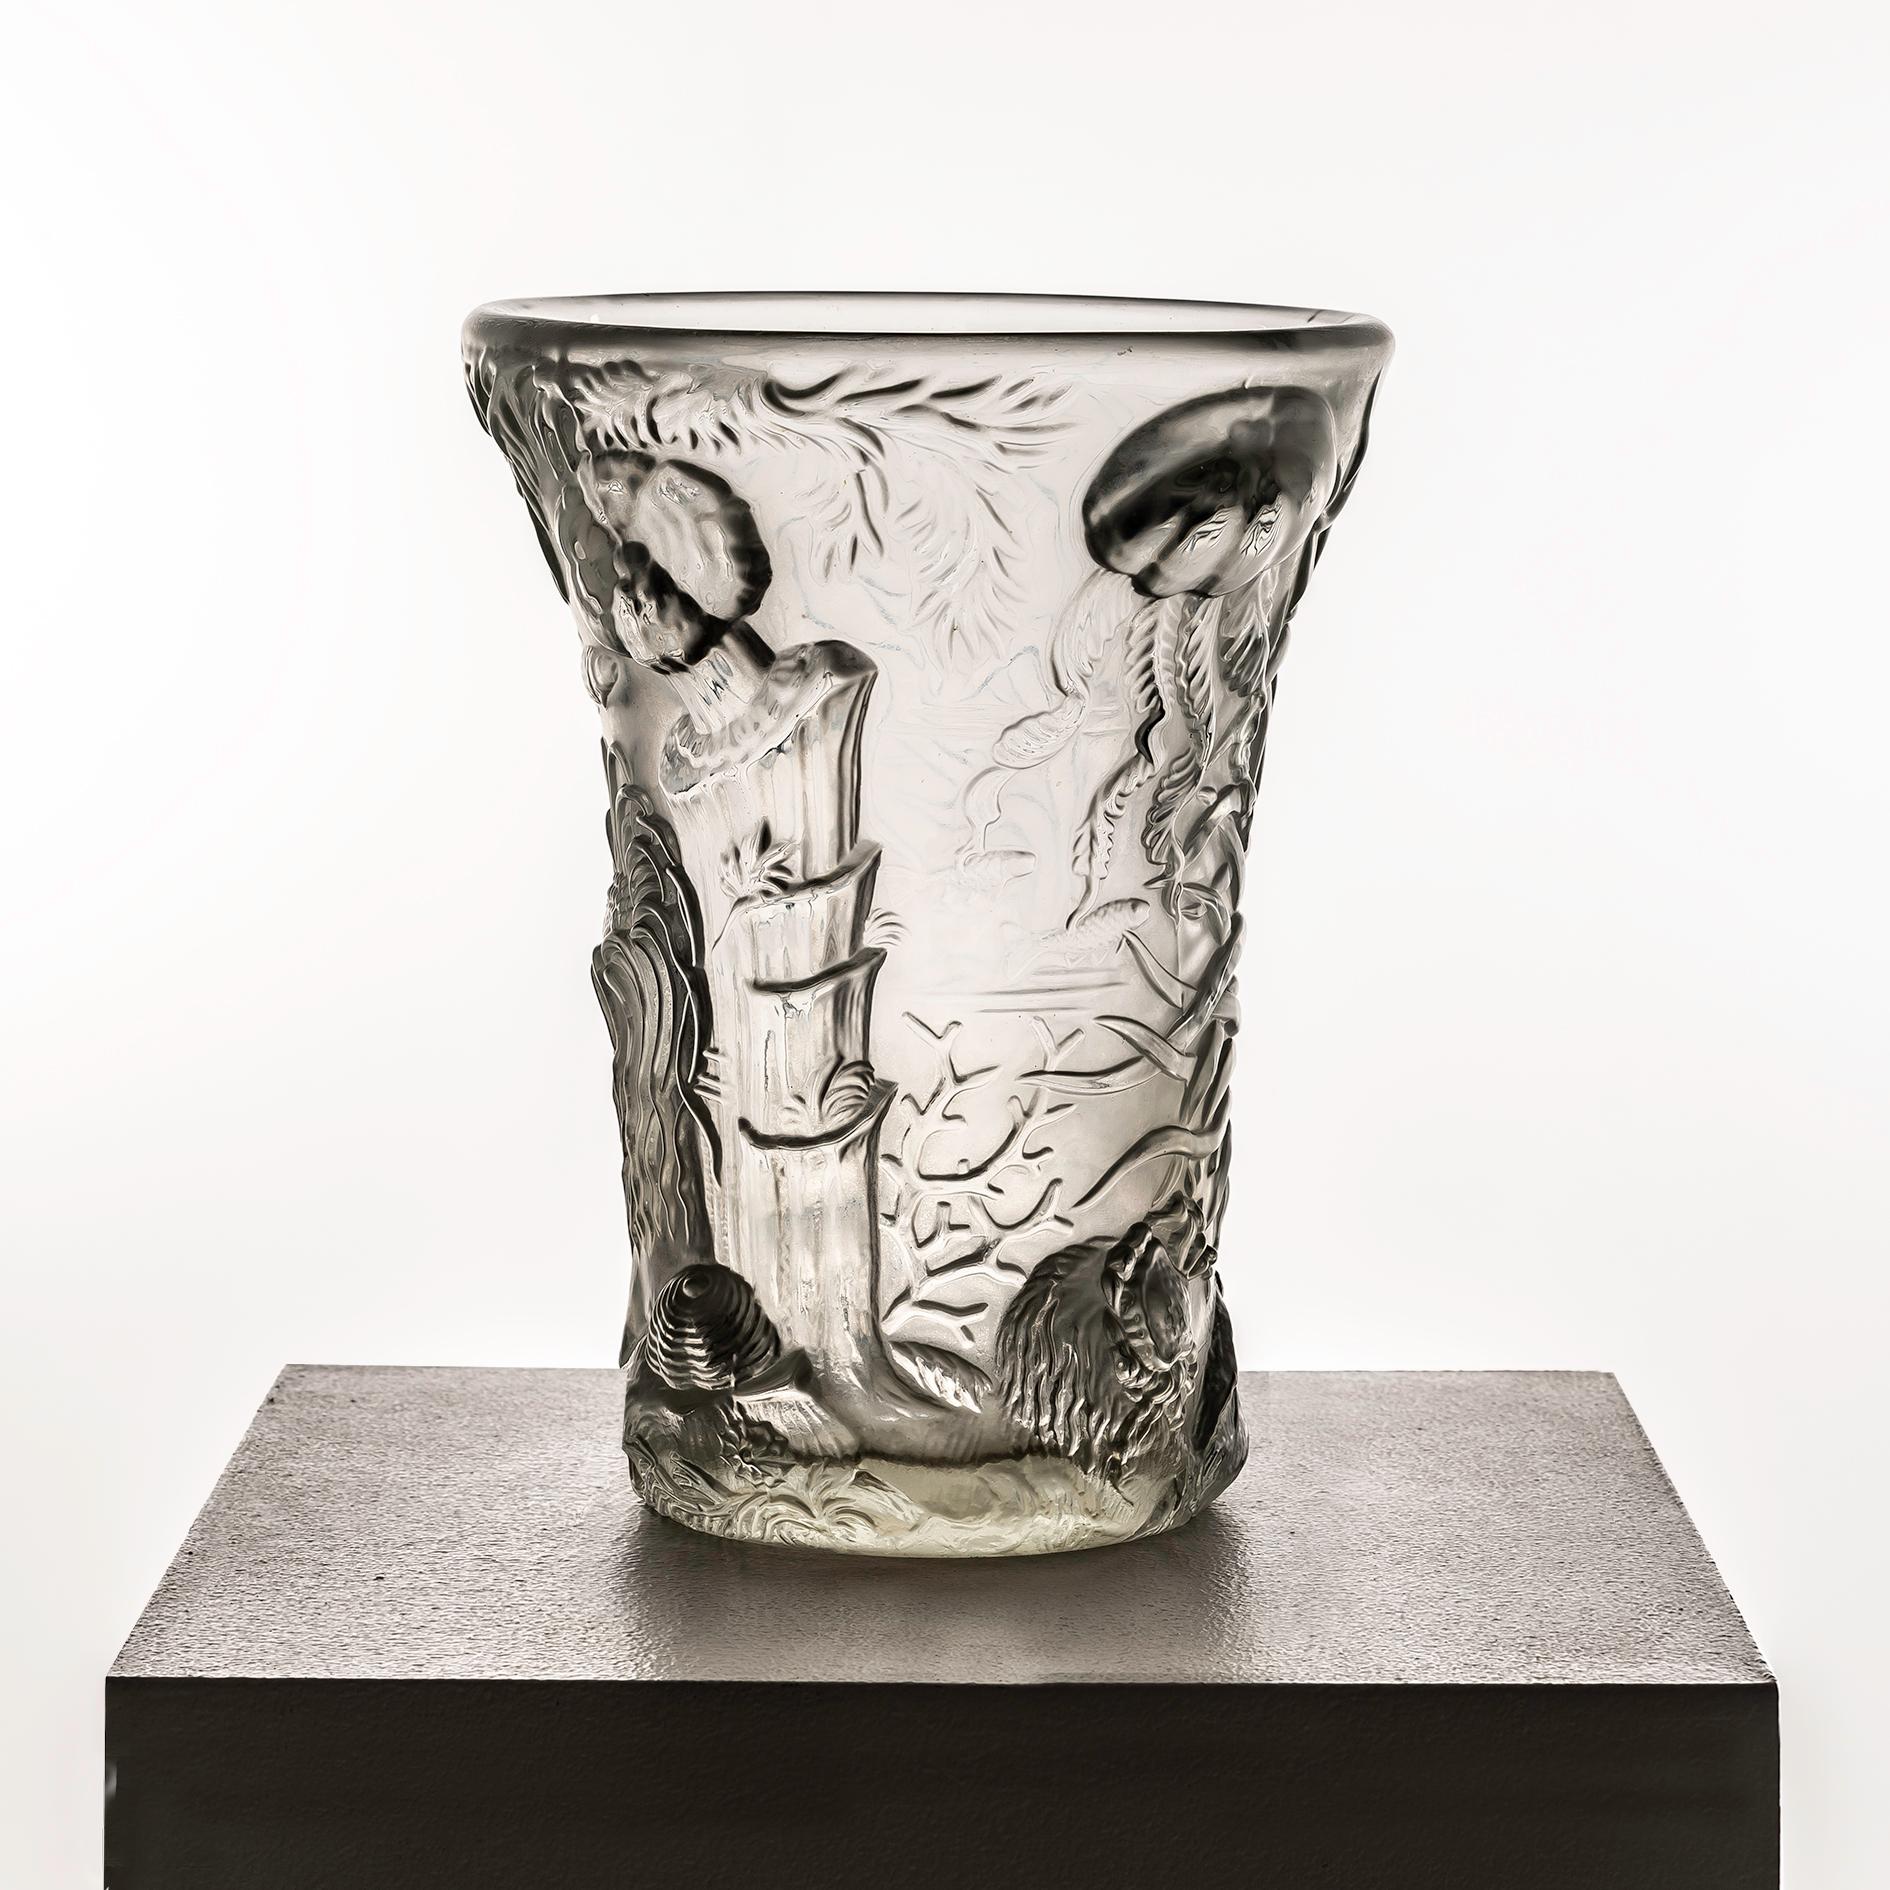 The Josef Inwald Glass Marine Life Vase for Barolac, created in the 1960s, stands as a testament to the exquisite craftsmanship and artistic innovation that defined mid-century glassware. This particular piece is revered for its unique design,